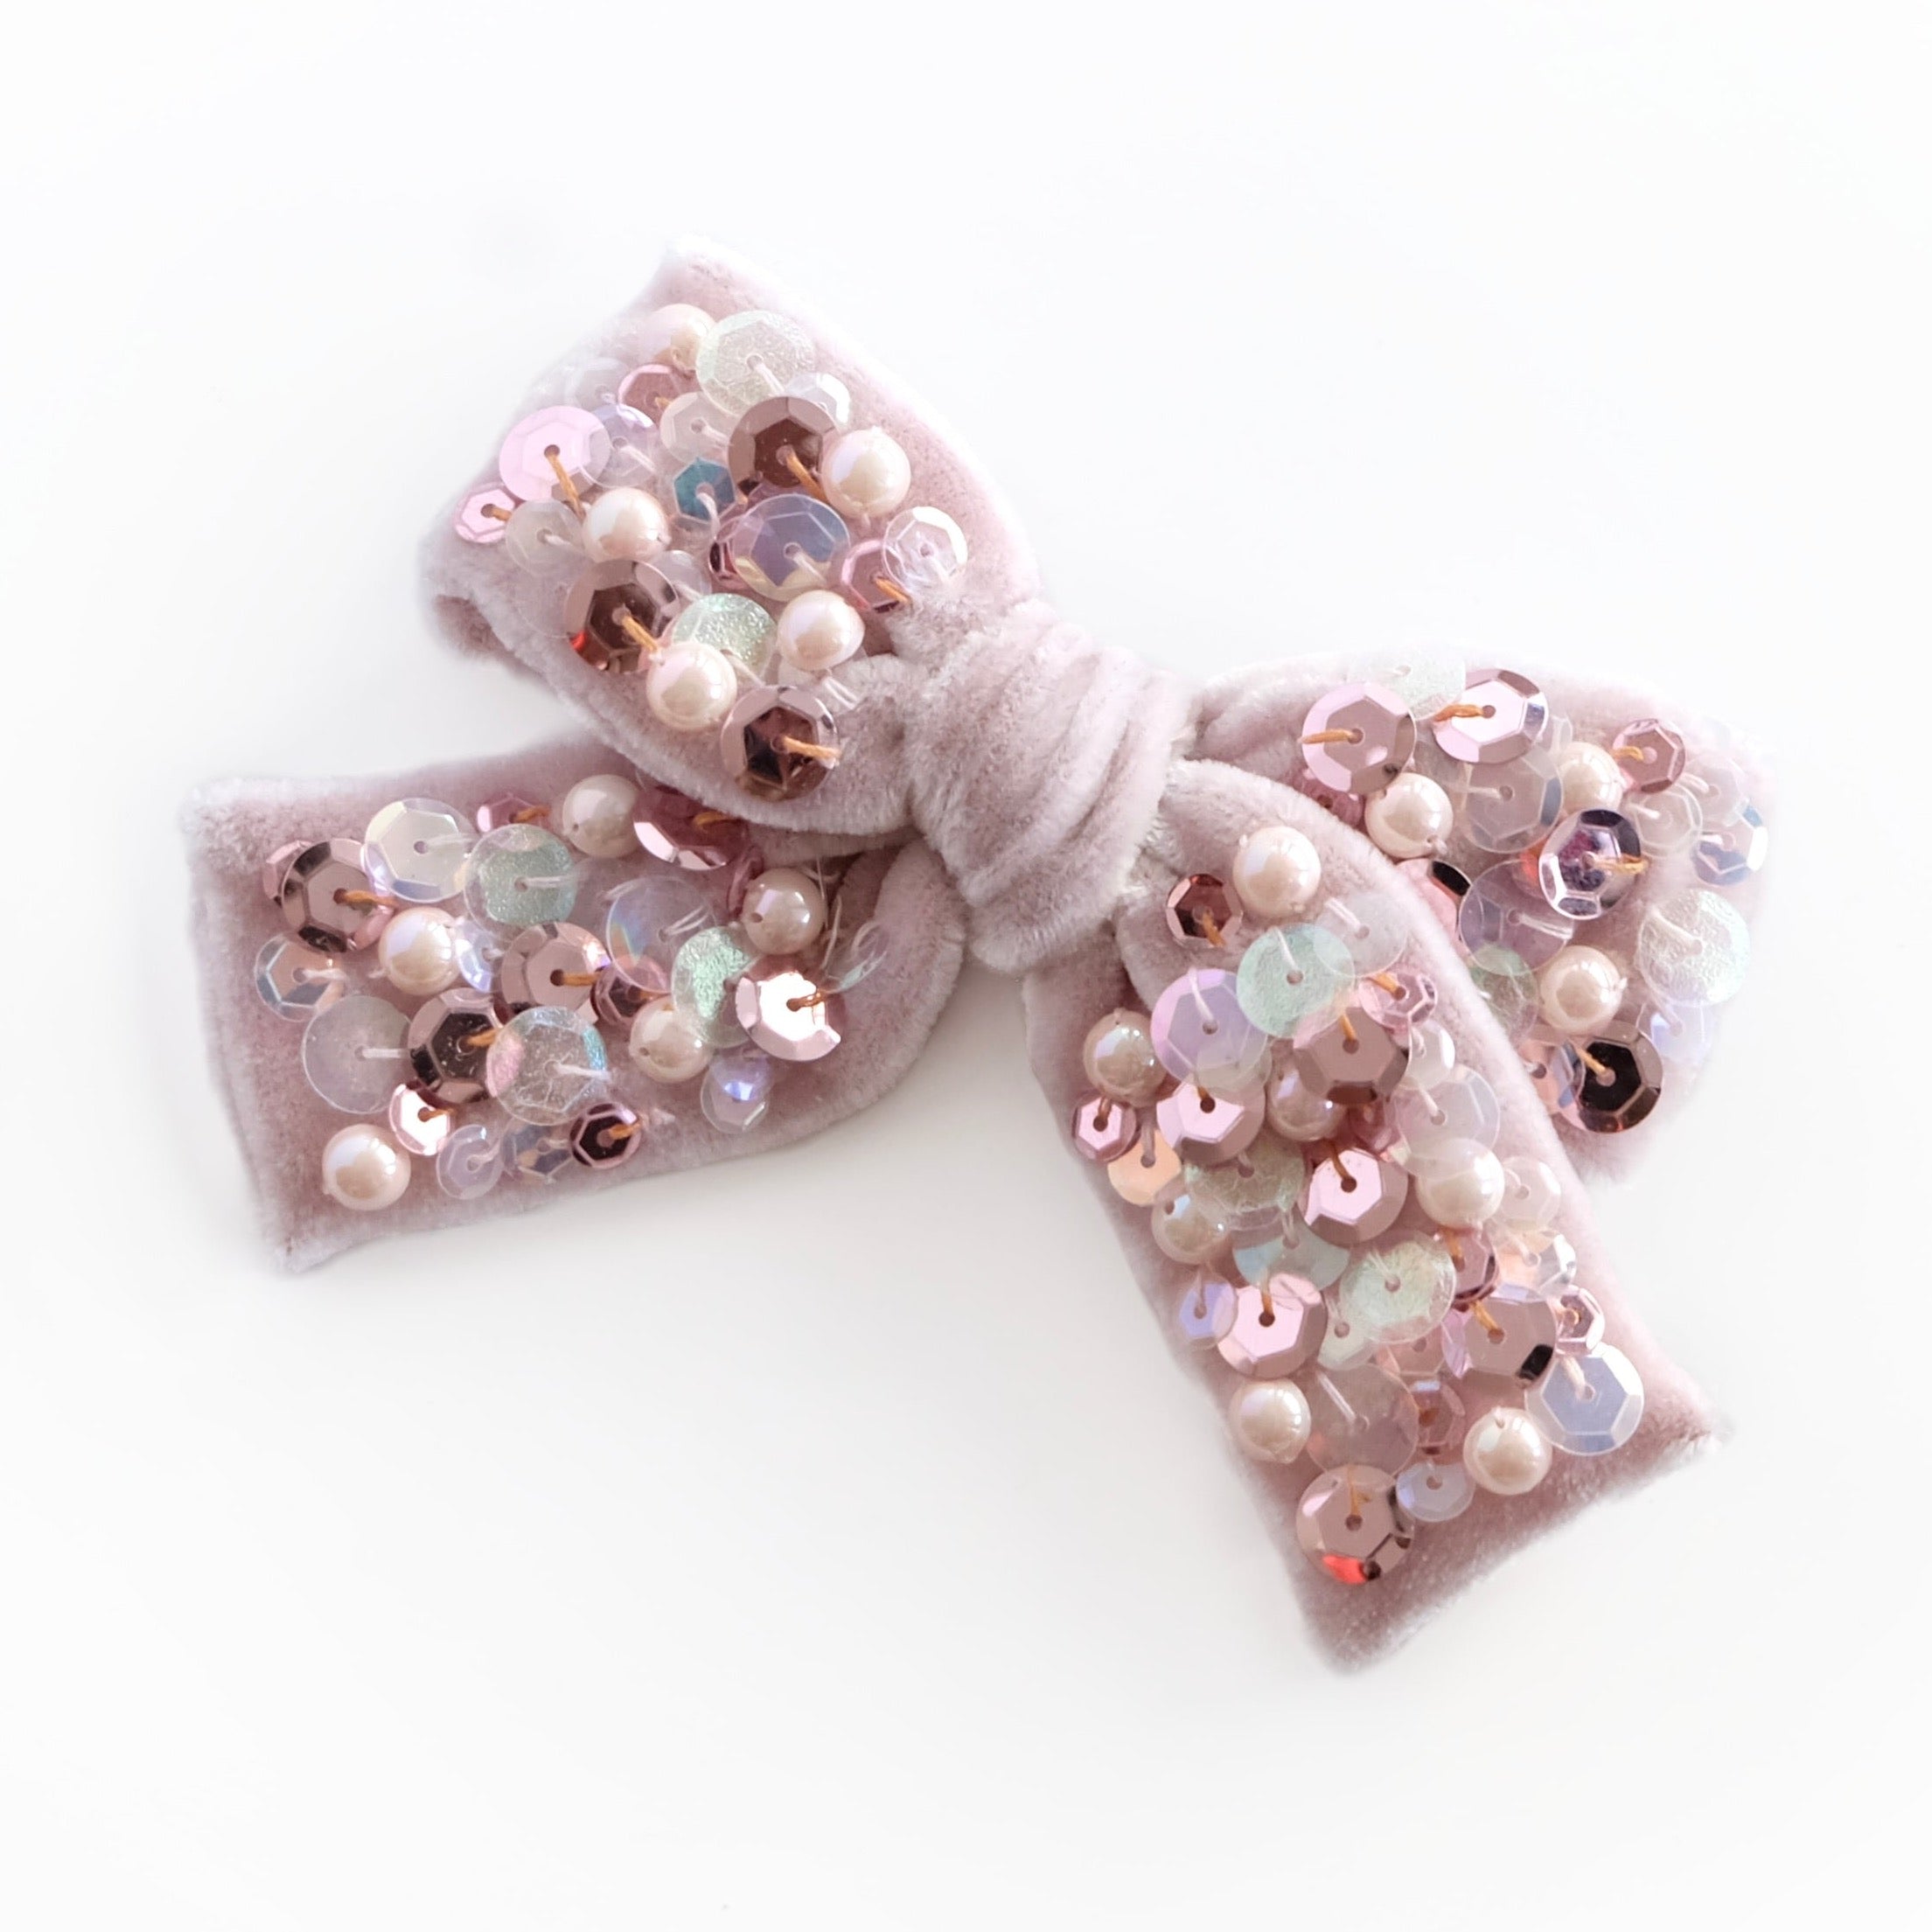 Sequin hair bow with pearls in pink tones.